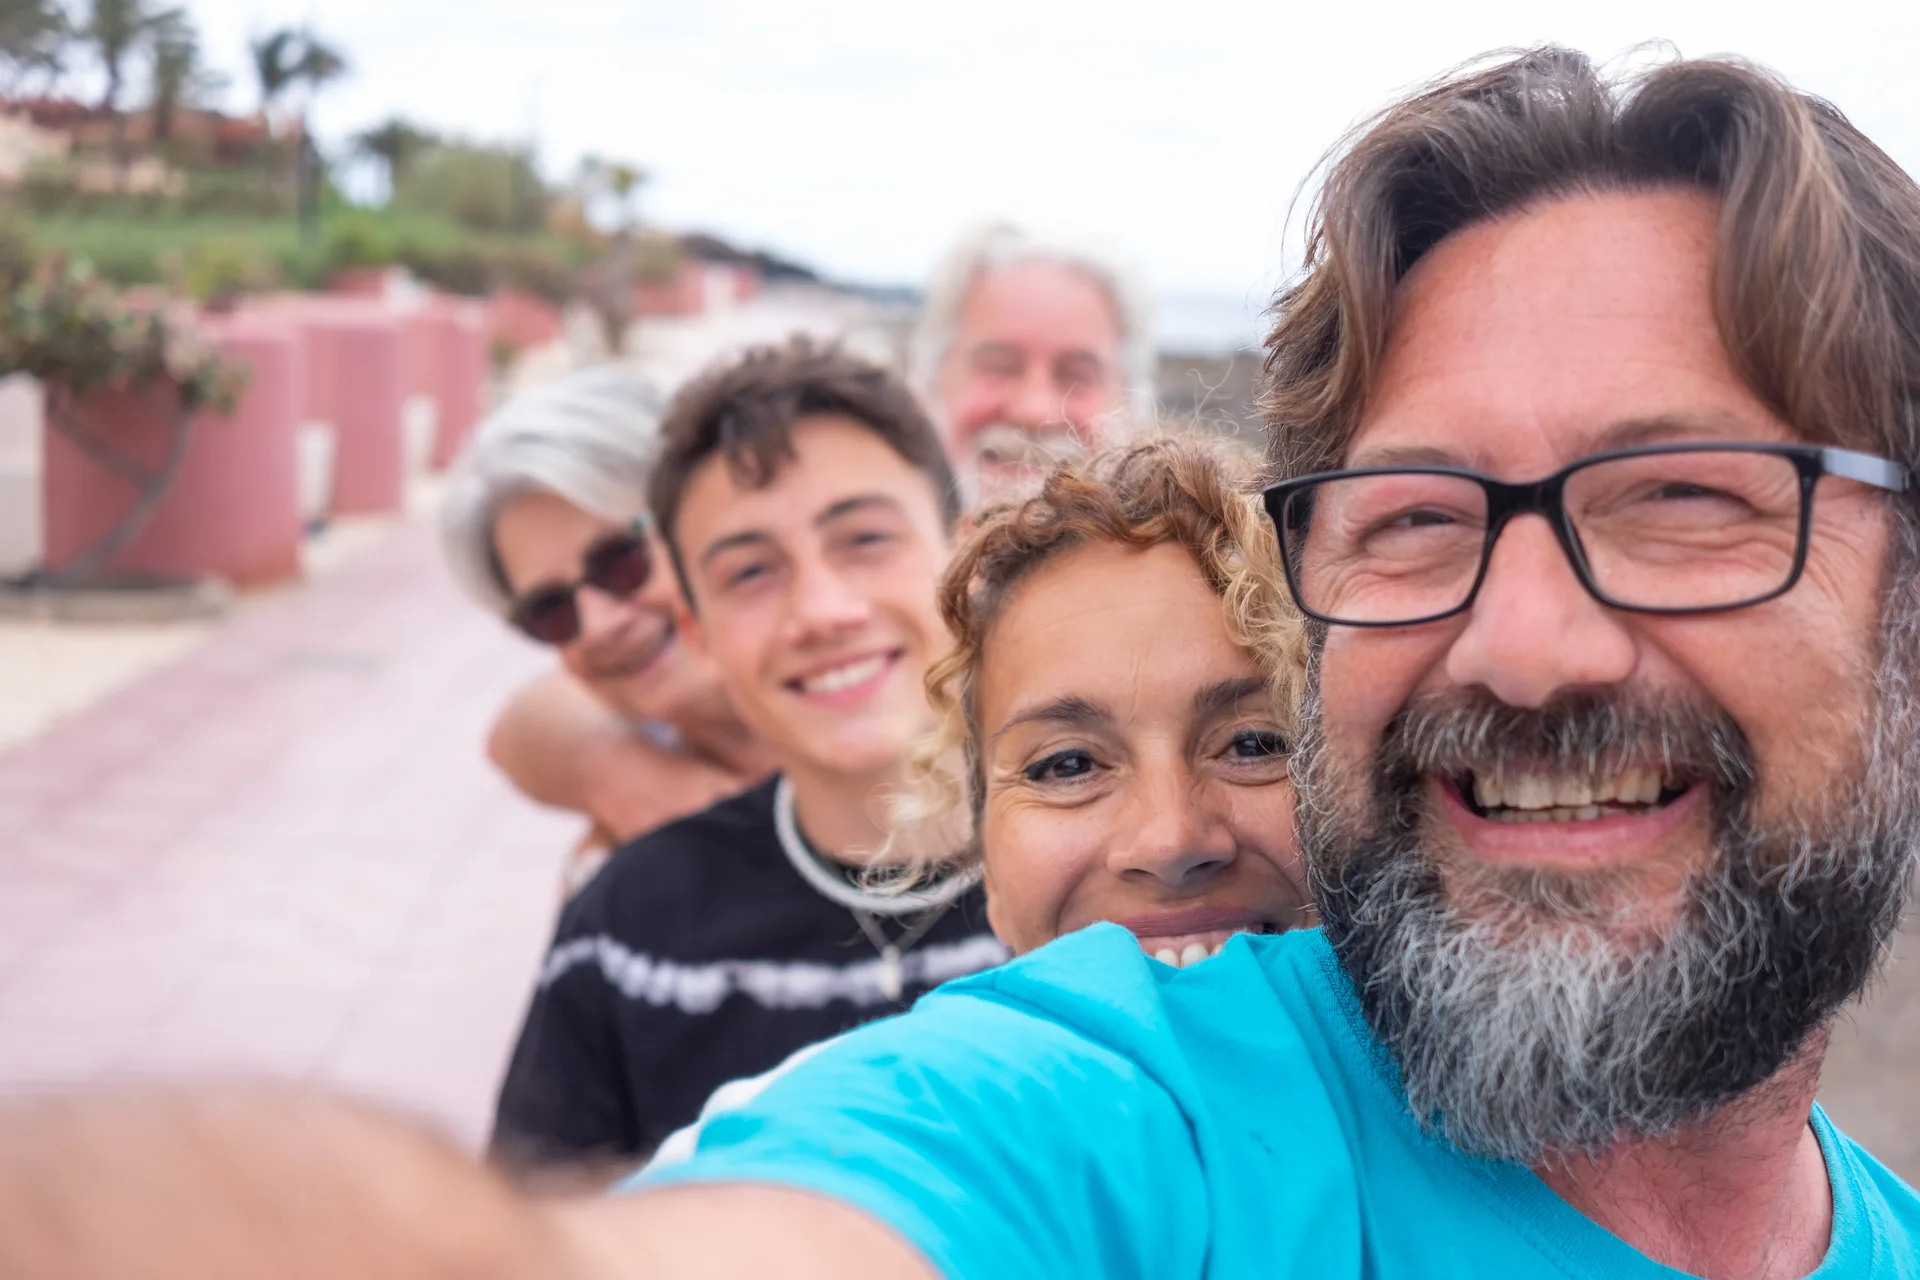 A multi-generational family taking a selfie, with a middle-aged man in the foreground smiling wide. the background is slightly blurred.